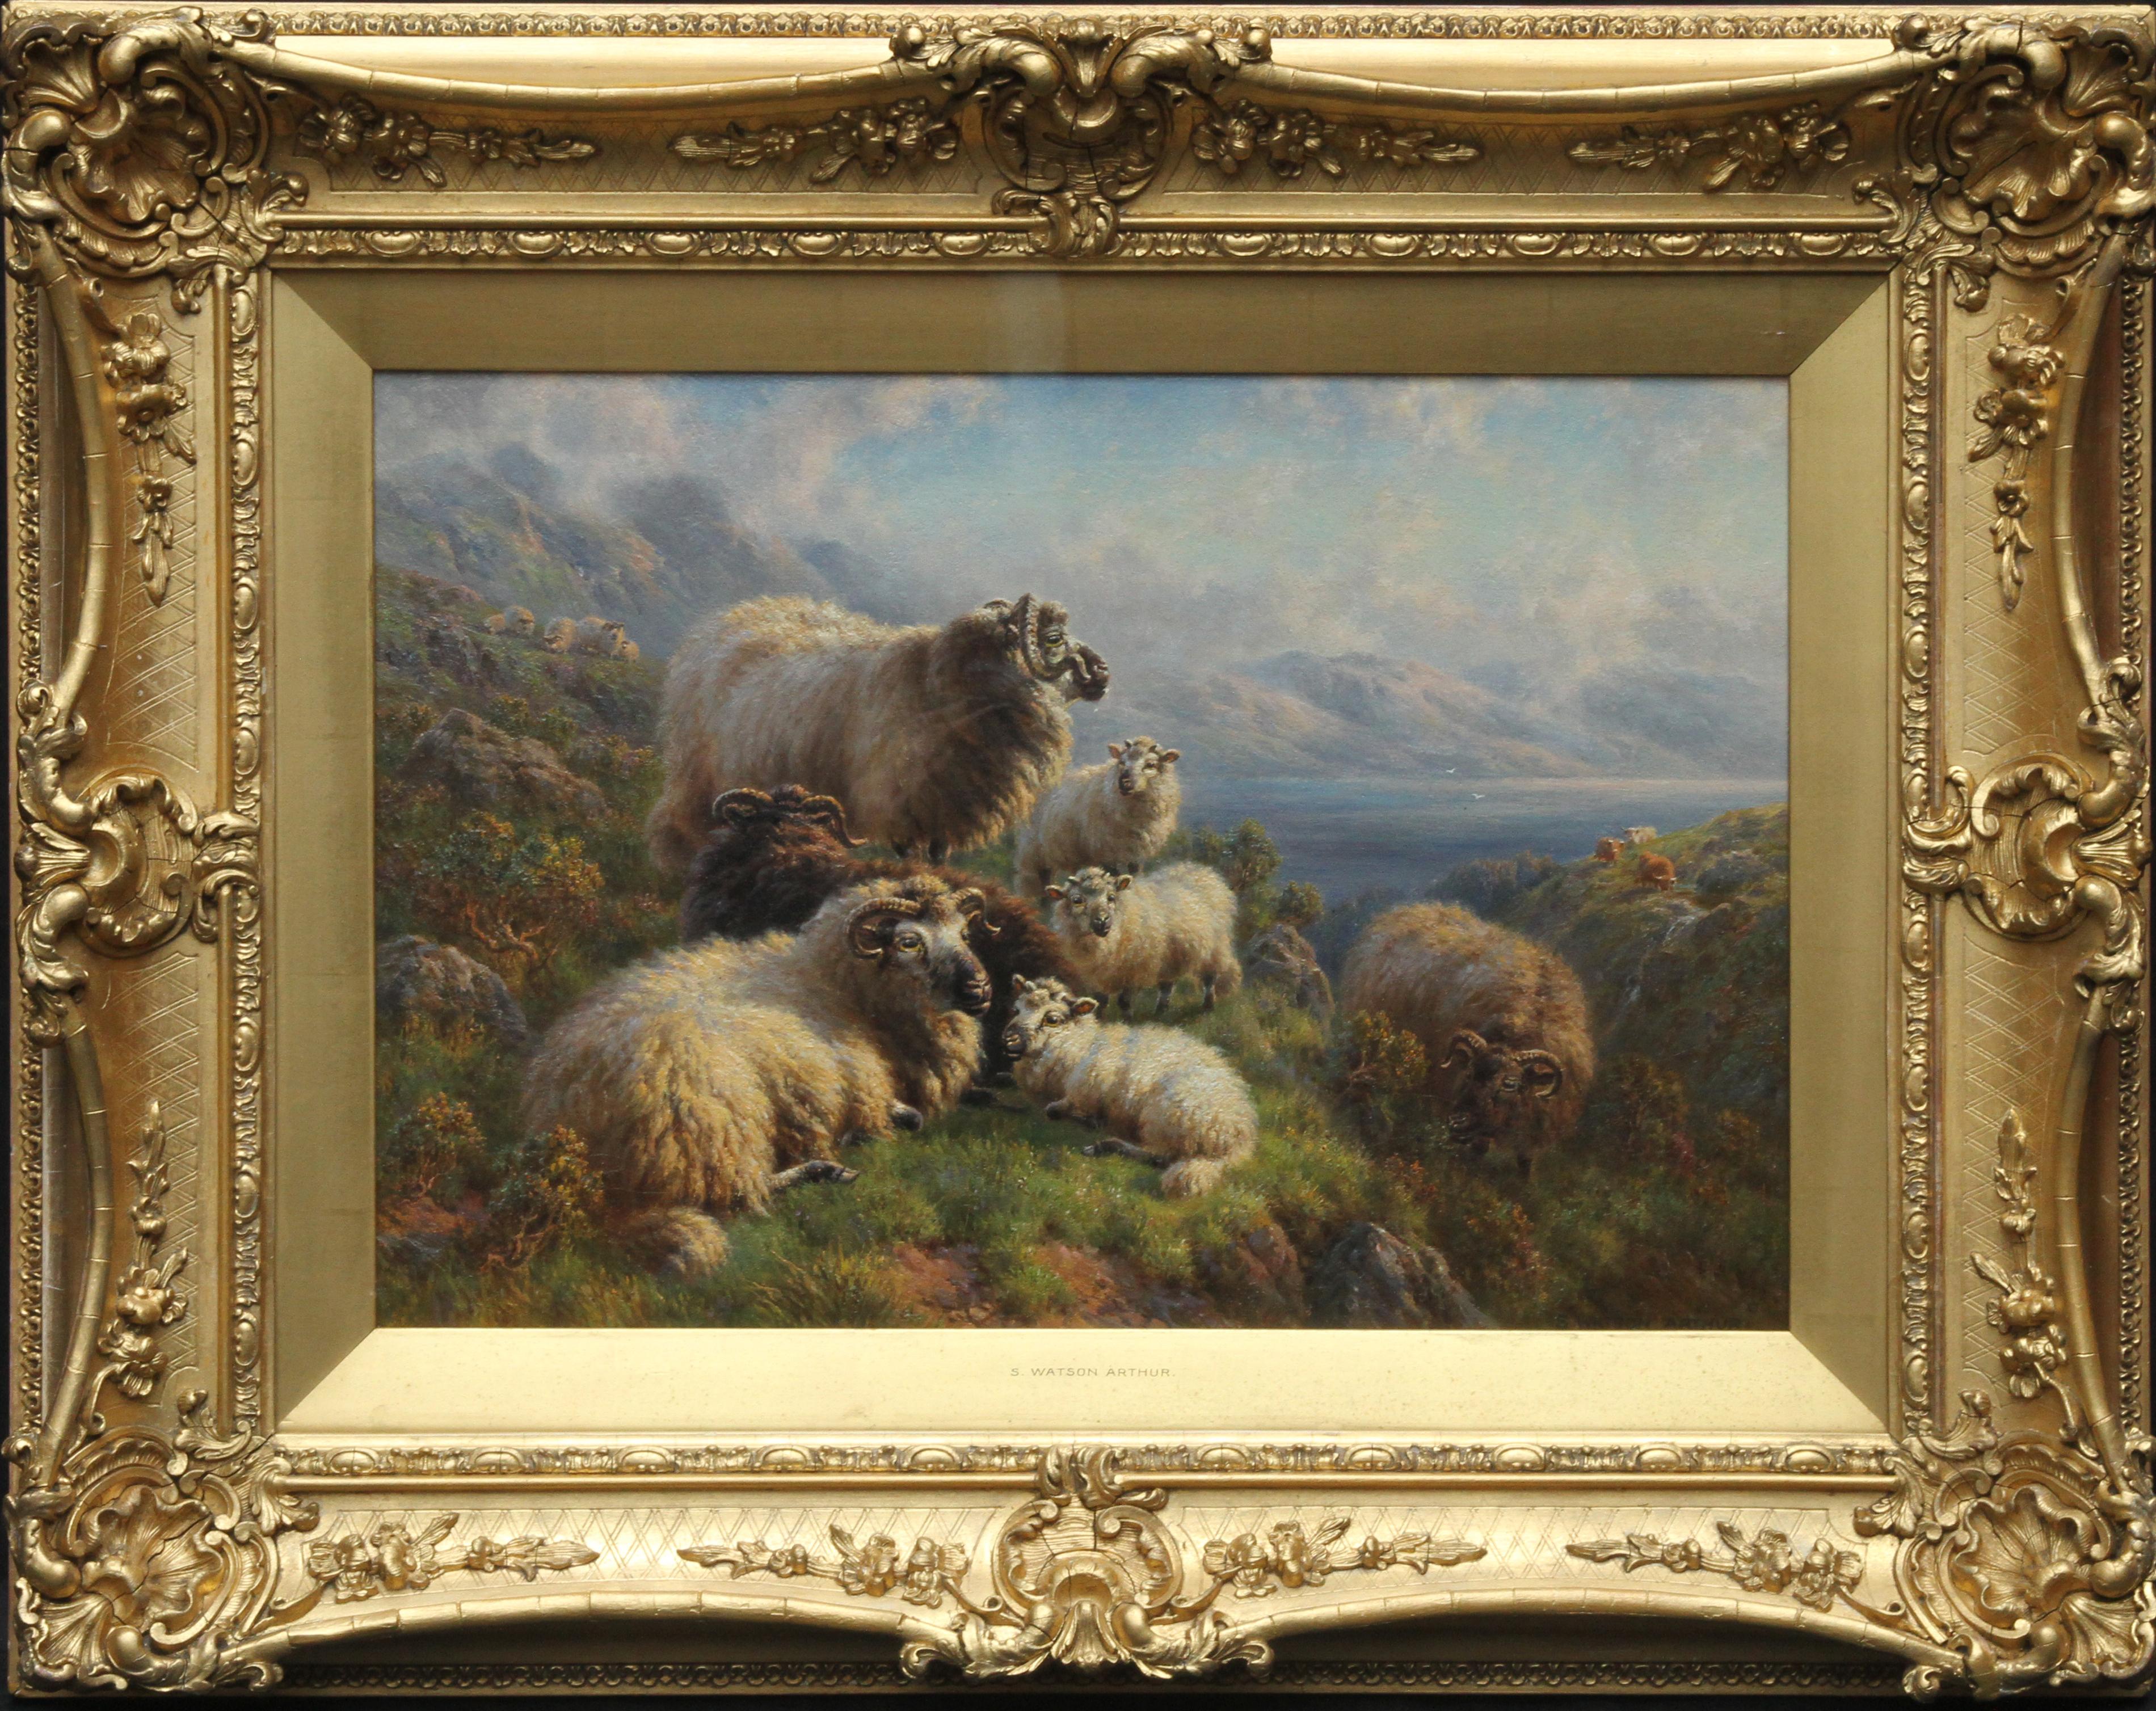 Sheep at Loch Tay Perthshire - British 1910 Edwardian art landscape oil painting 3